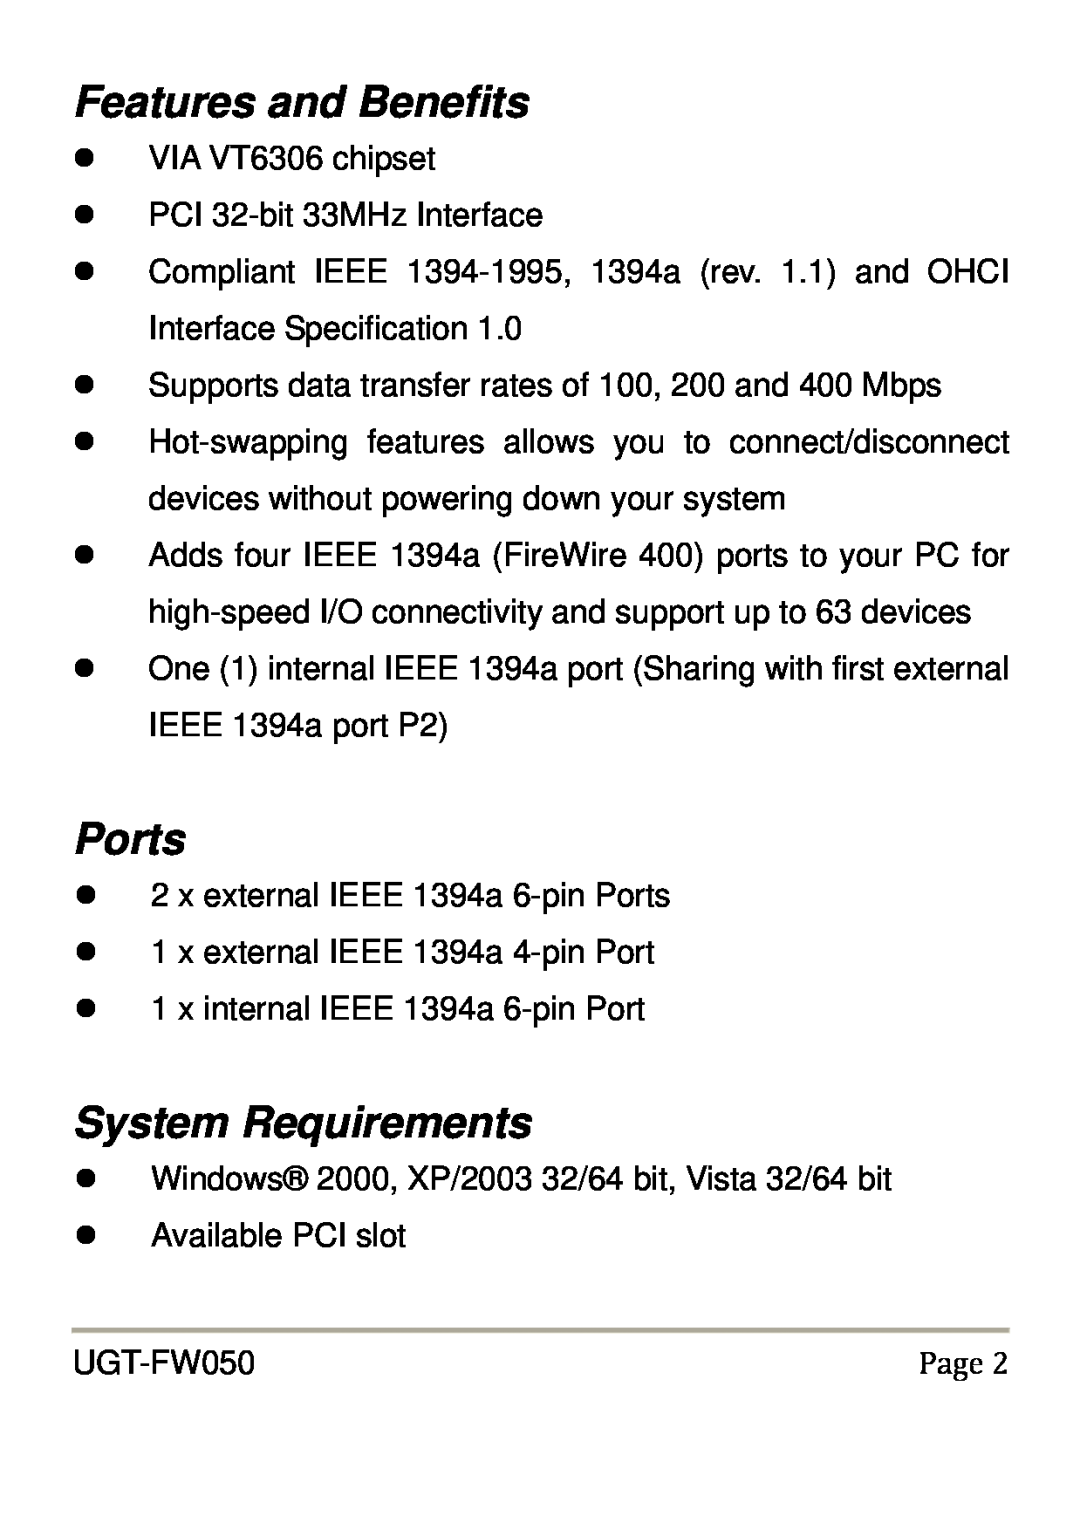 Vantec UGT-FW050 user manual Features and Benefits, Ports, System Requirements 